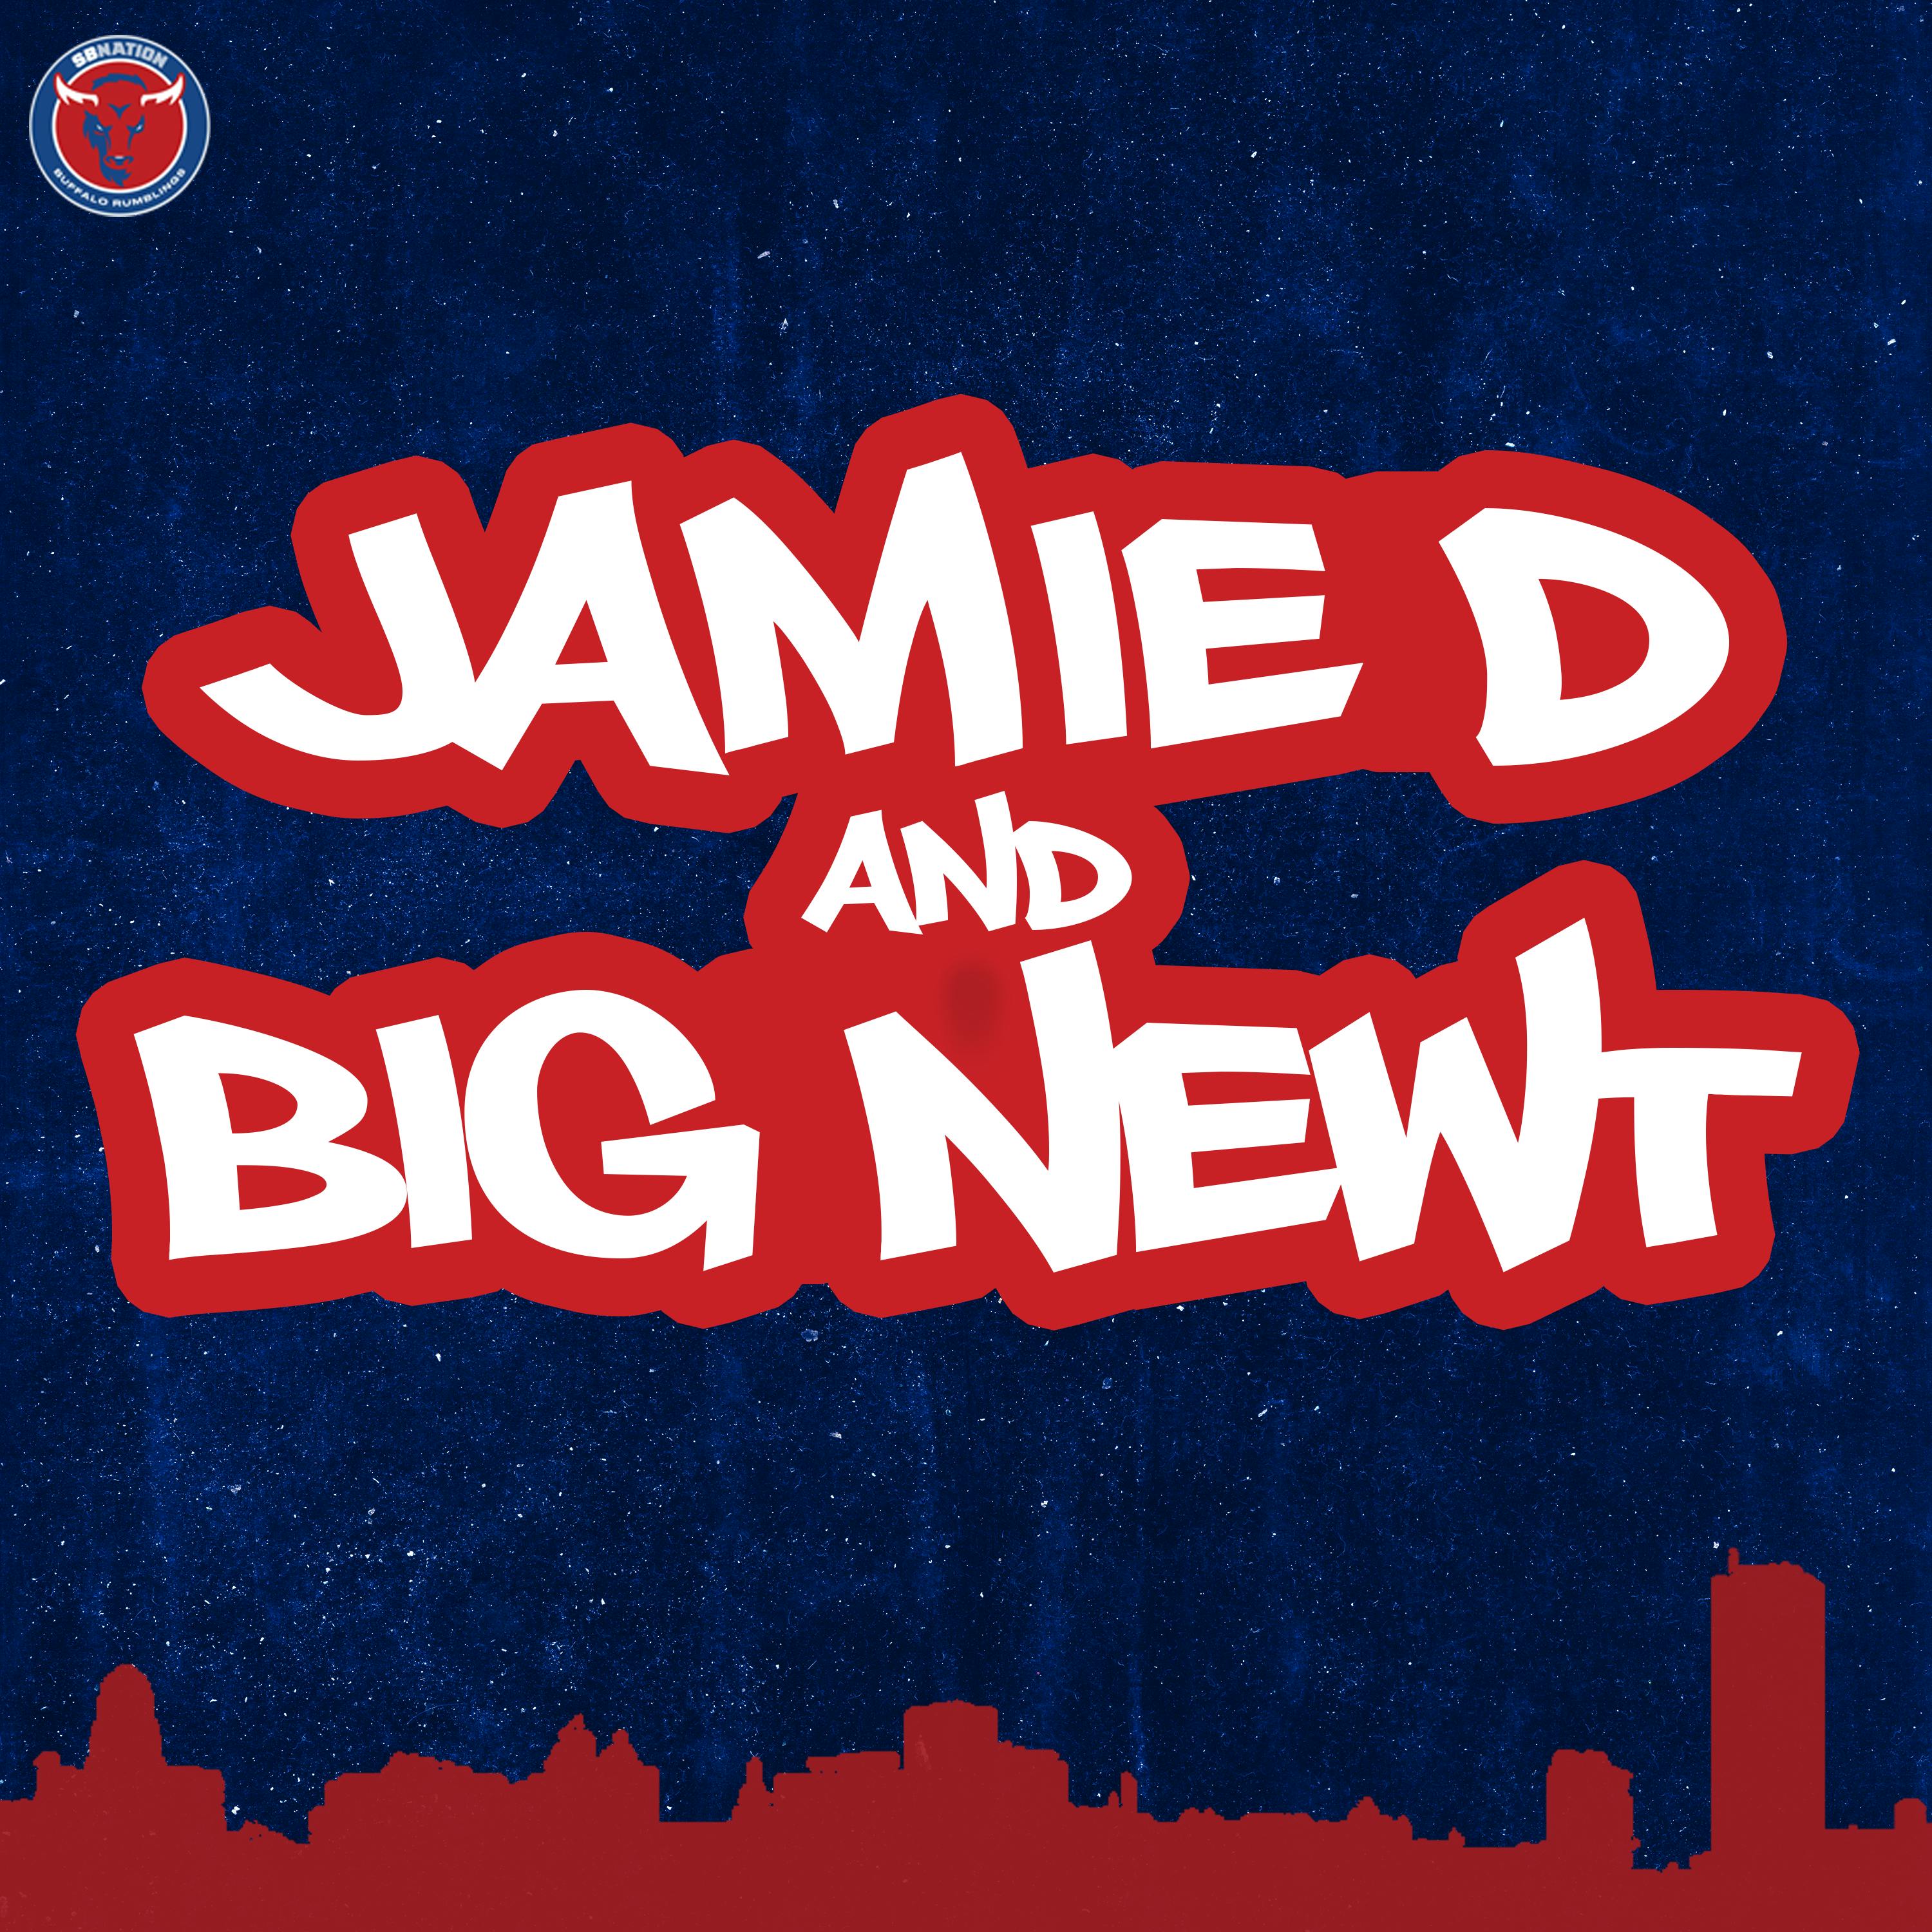 Jamie D & Big Newt: Easing the emotions of Bills playoff loss